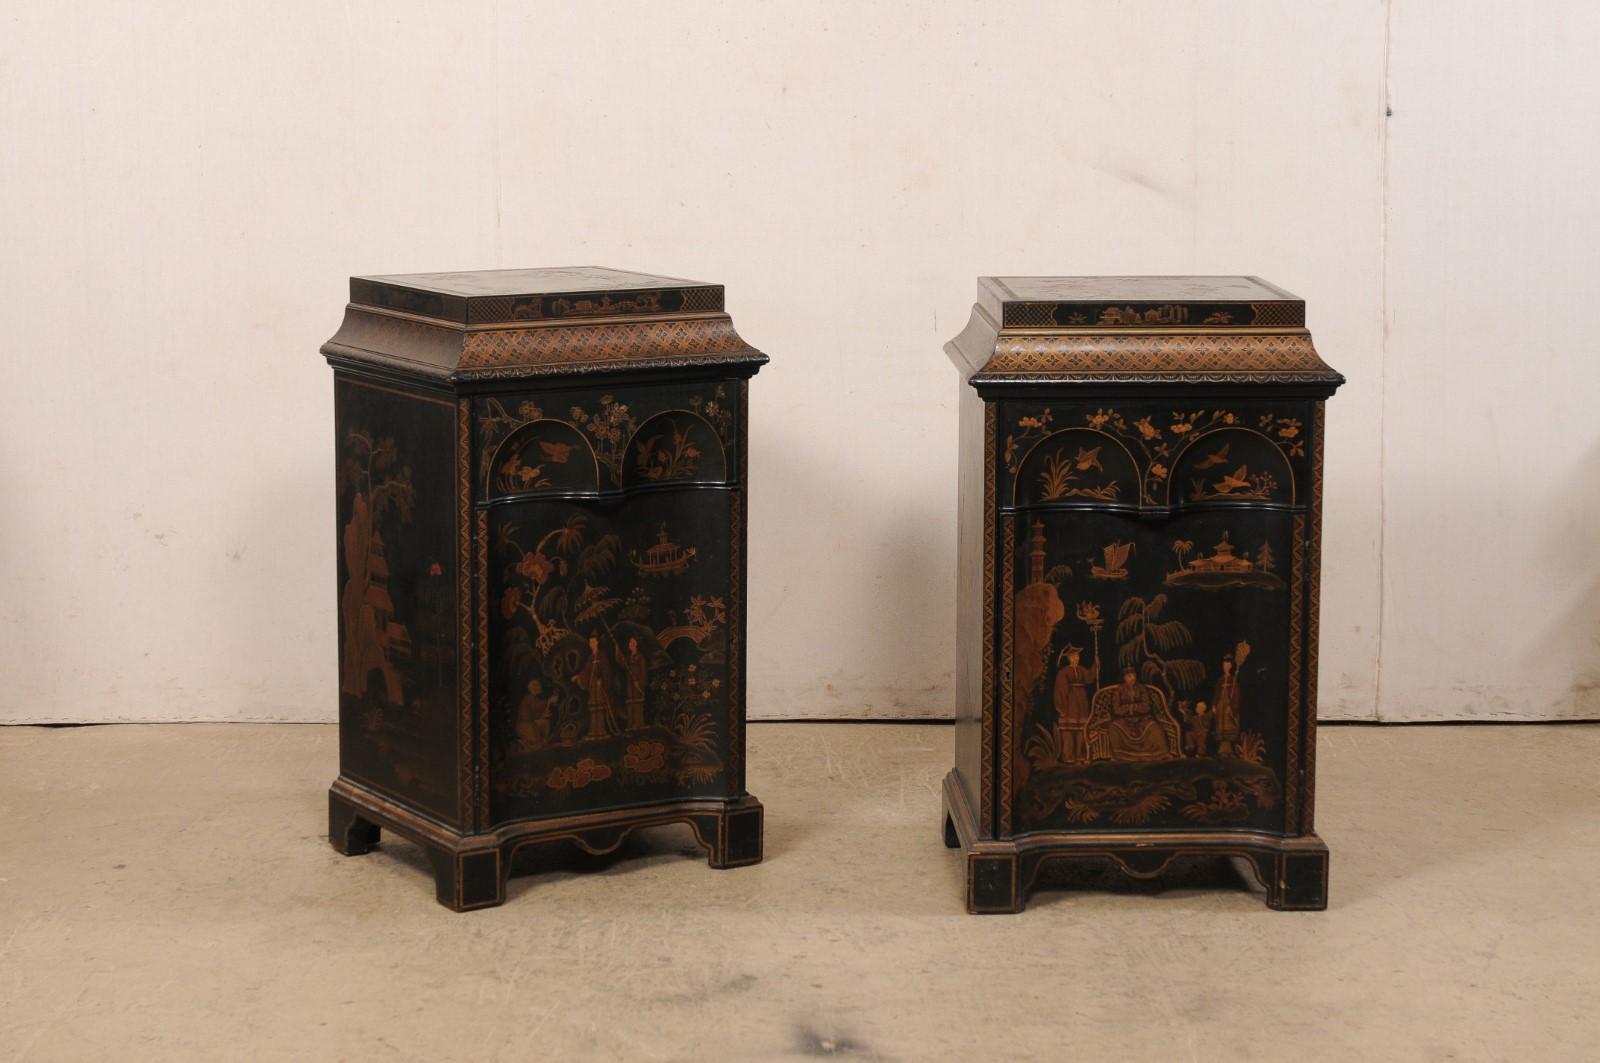 An early 20th century pair of smaller-sized wooden cabinets with chinoiserie embellishments, designed and made by The Haden Company, New York. This antique pair of Asian side chests are nicely designed with pagoda inspired tops above a case which